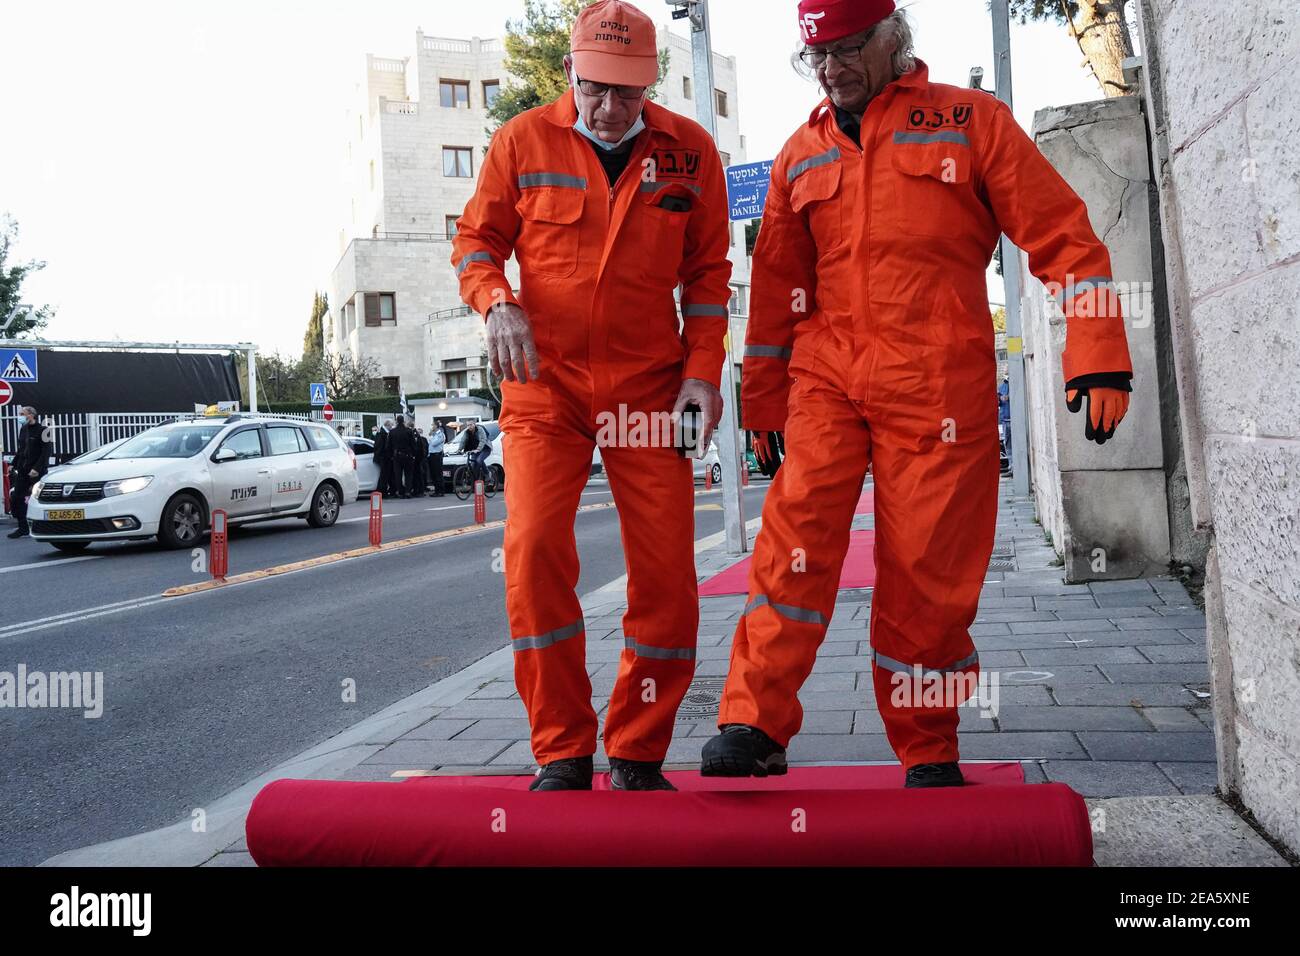 Jerusalem, Israel. 8th Feb, 2021. Crime Minister anti Netanyahu activists lay a red carpet and conduct a mock cleanup operation to ‘clean up corruption' and demand PM's resignation at the Prime Minister's Residence in Jerusalem. Netanyahu's trial begins later today with a hearing he is required to attend at the Jerusalem District Court focusing on his response to the criminal indictment against him. Israel's first serving prime minister to go on criminal trial faces charges of bribery, fraud and breach of trust ahead of 23rd March, 2021 elections. Credit: Nir Alon/Alamy Live News Stock Photo